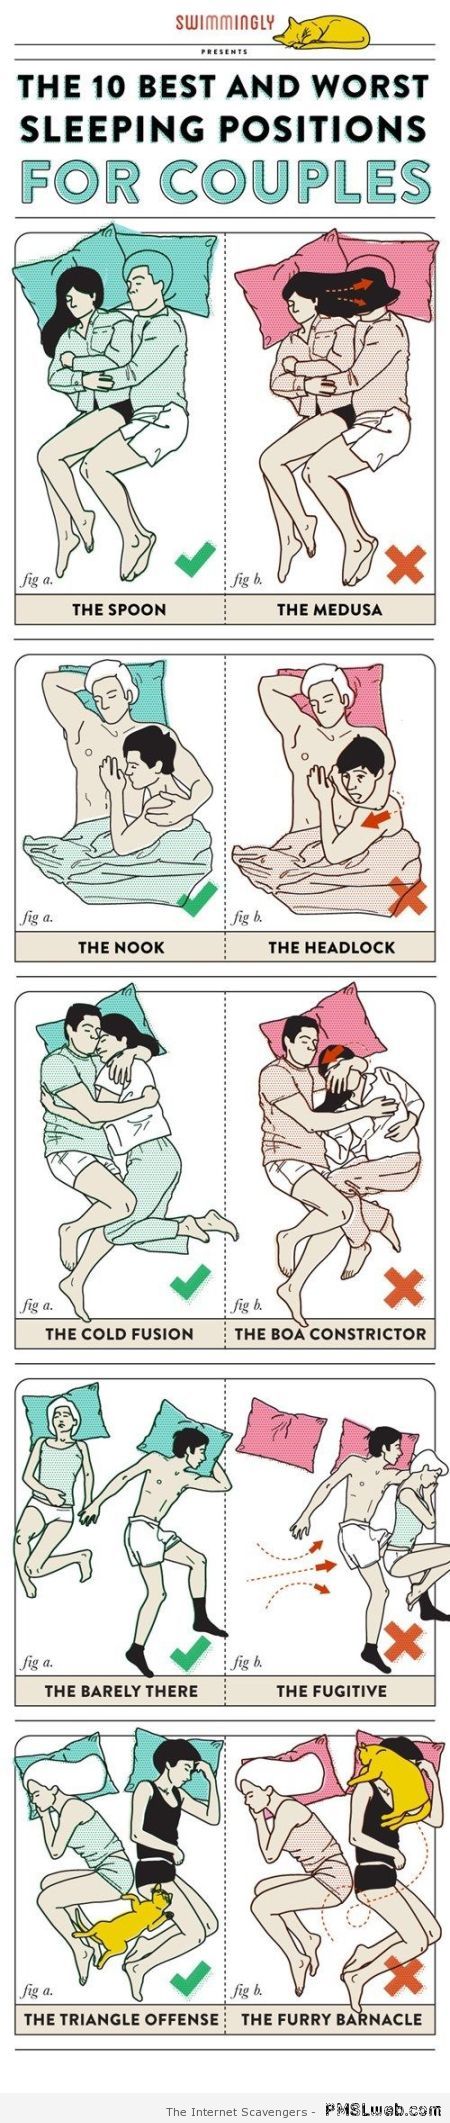 Best and worst sleeping positions for couples at PMSLweb.com